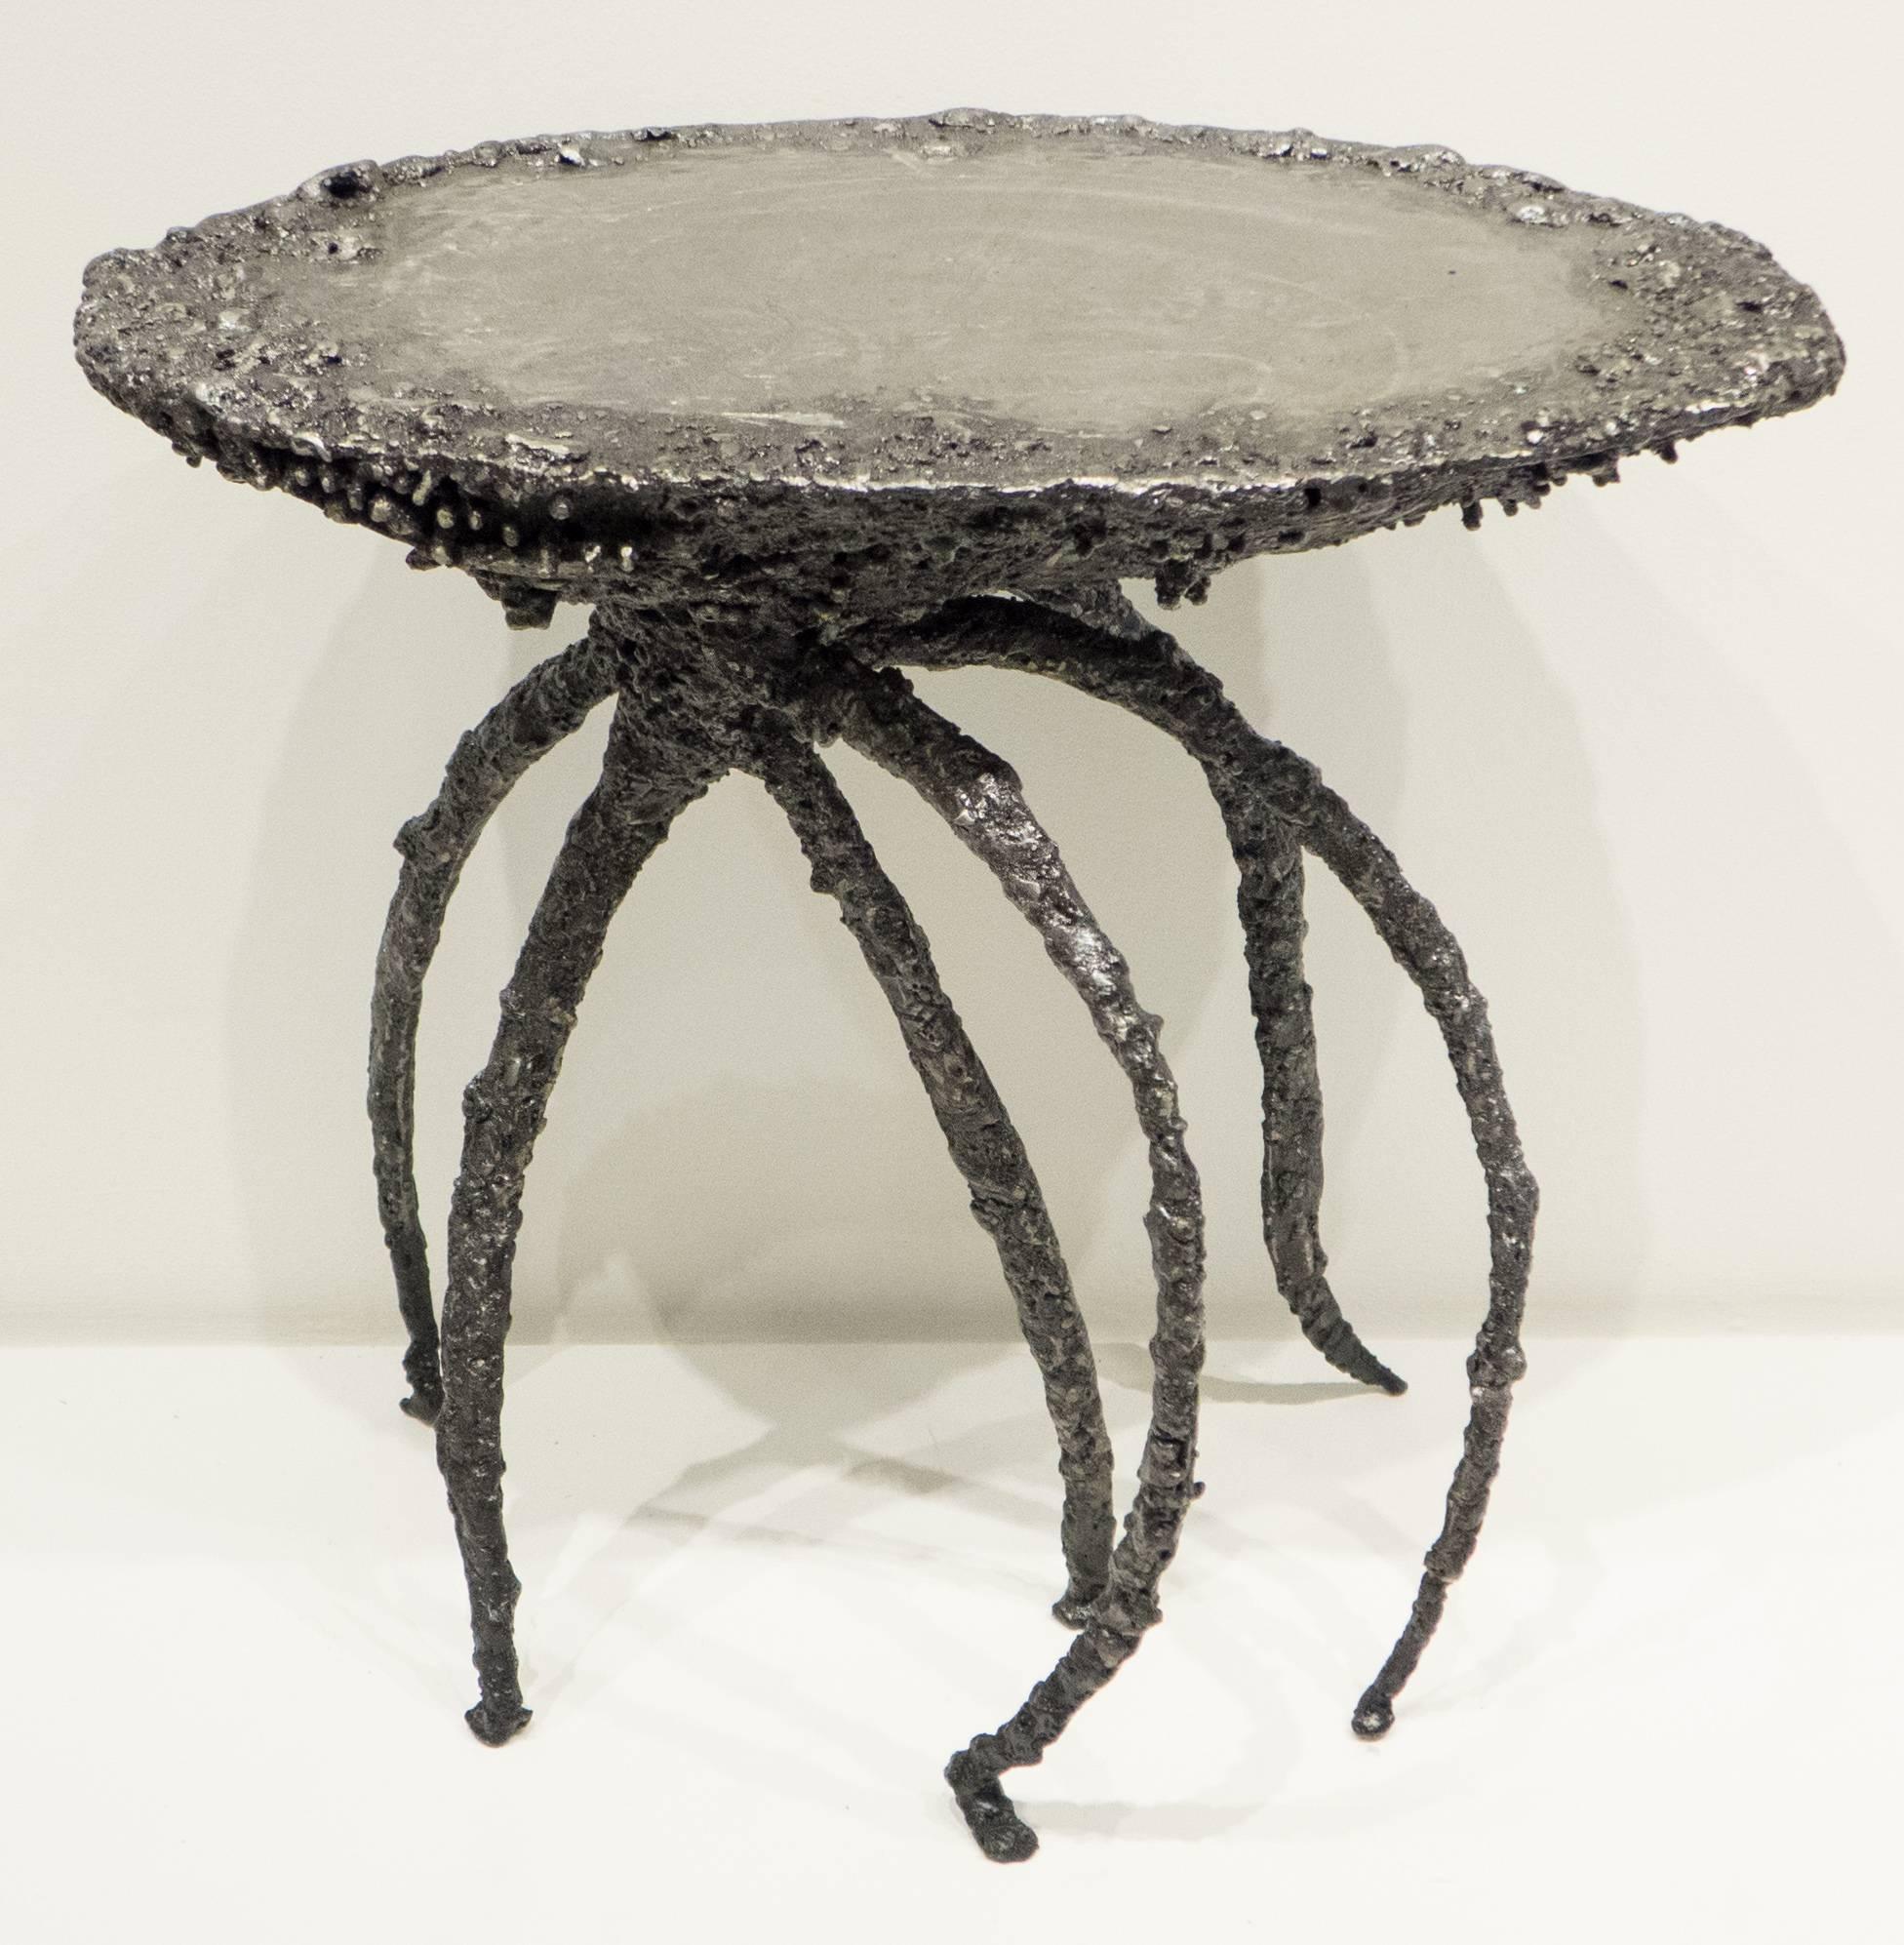 Anthropomorphic side table of torch-cut, welded, textured and enameled steel. By American artist James Bearden. Bearden's work was recently featured in a solo exhibition at the NY Design Center titled 